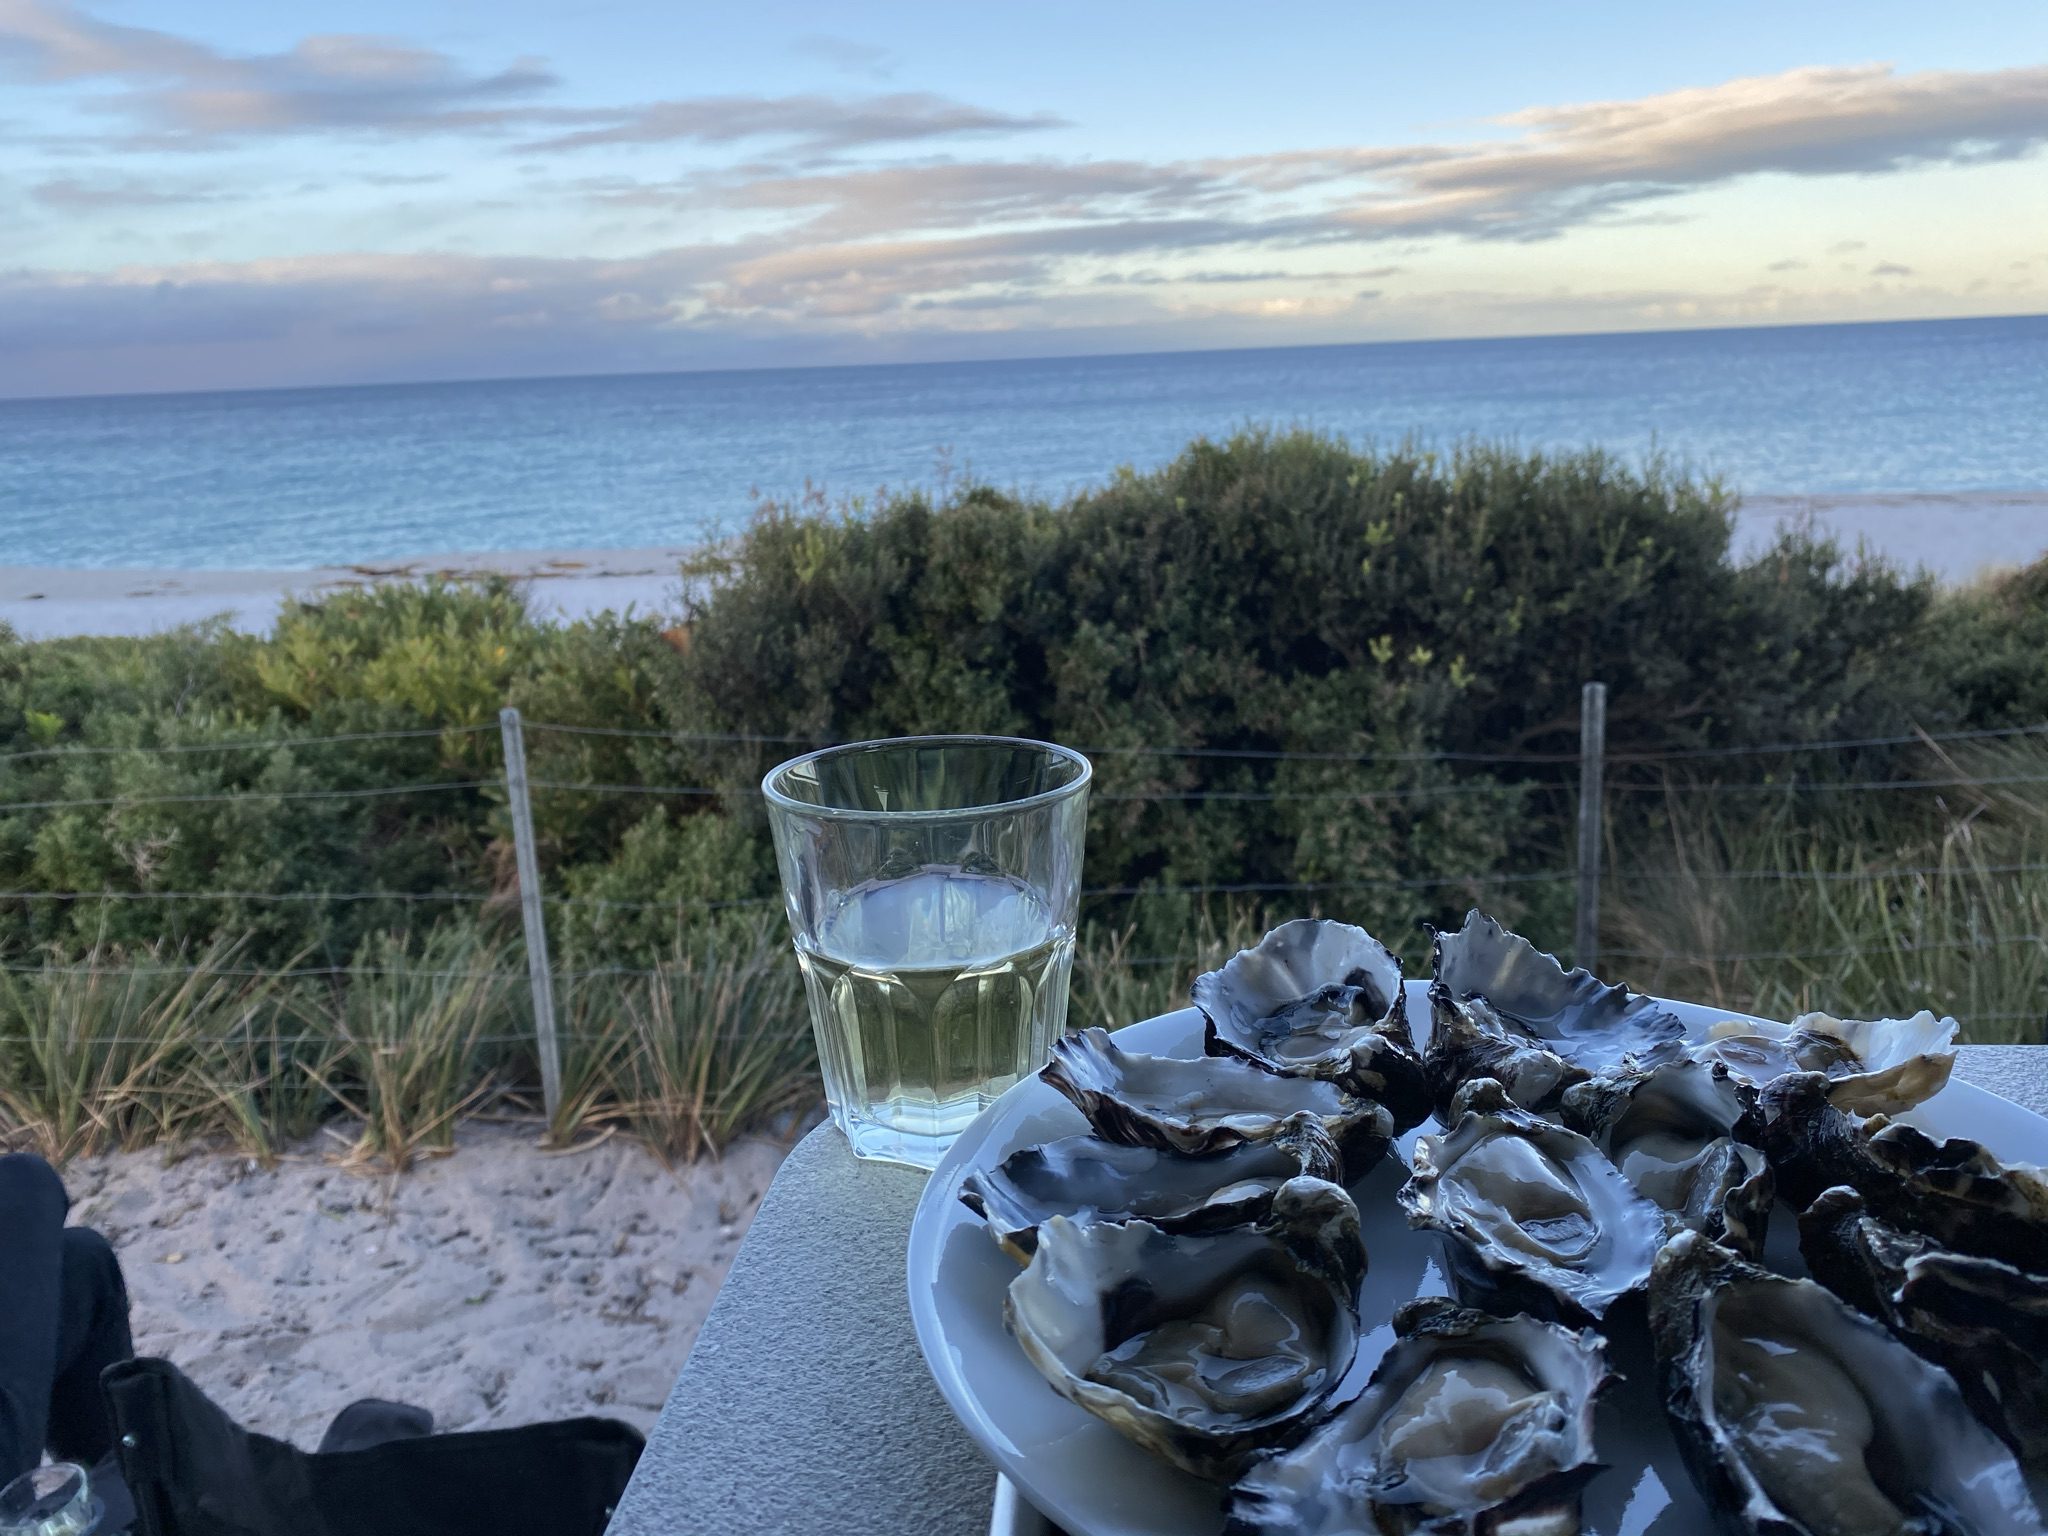 A plate of shucked oysters and a tumbler of white wine on a surface overlooking a sandy beach with bushes in front of the water.